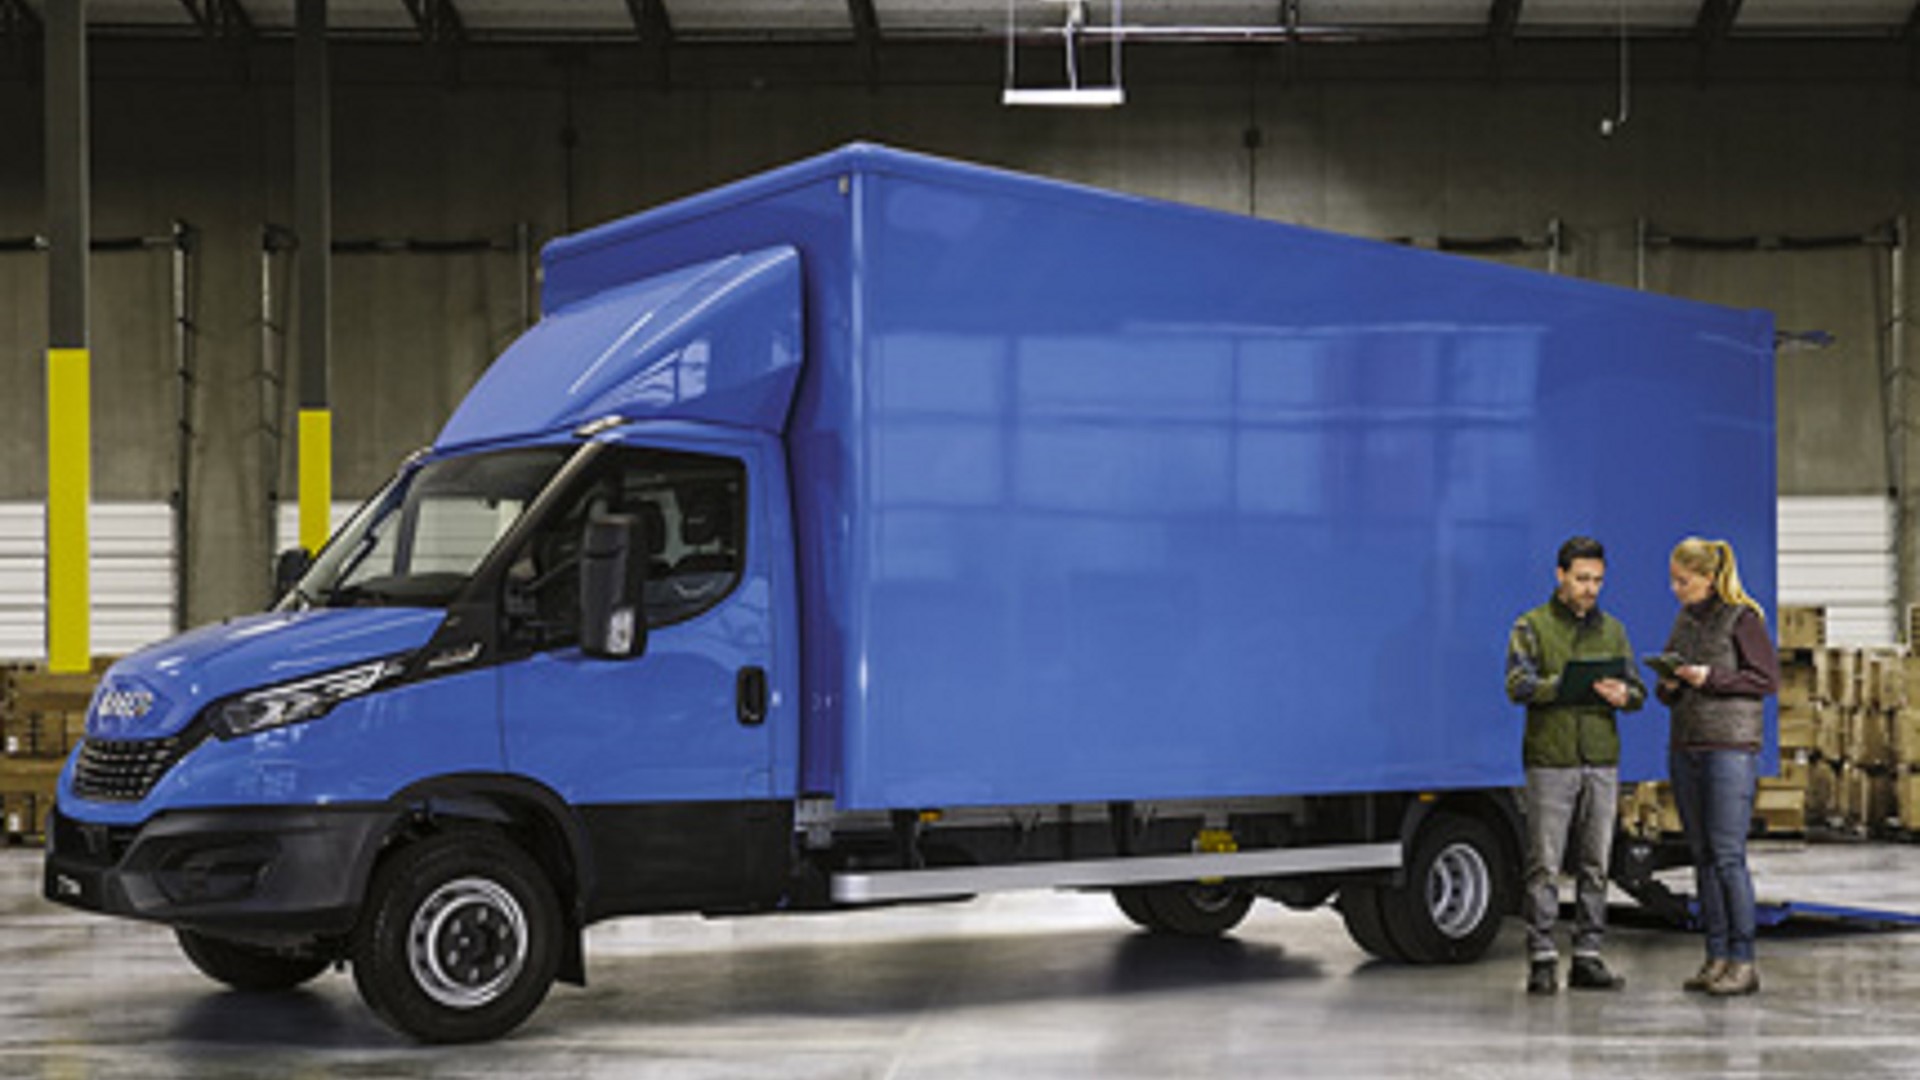 IVECO DAILY.jpg